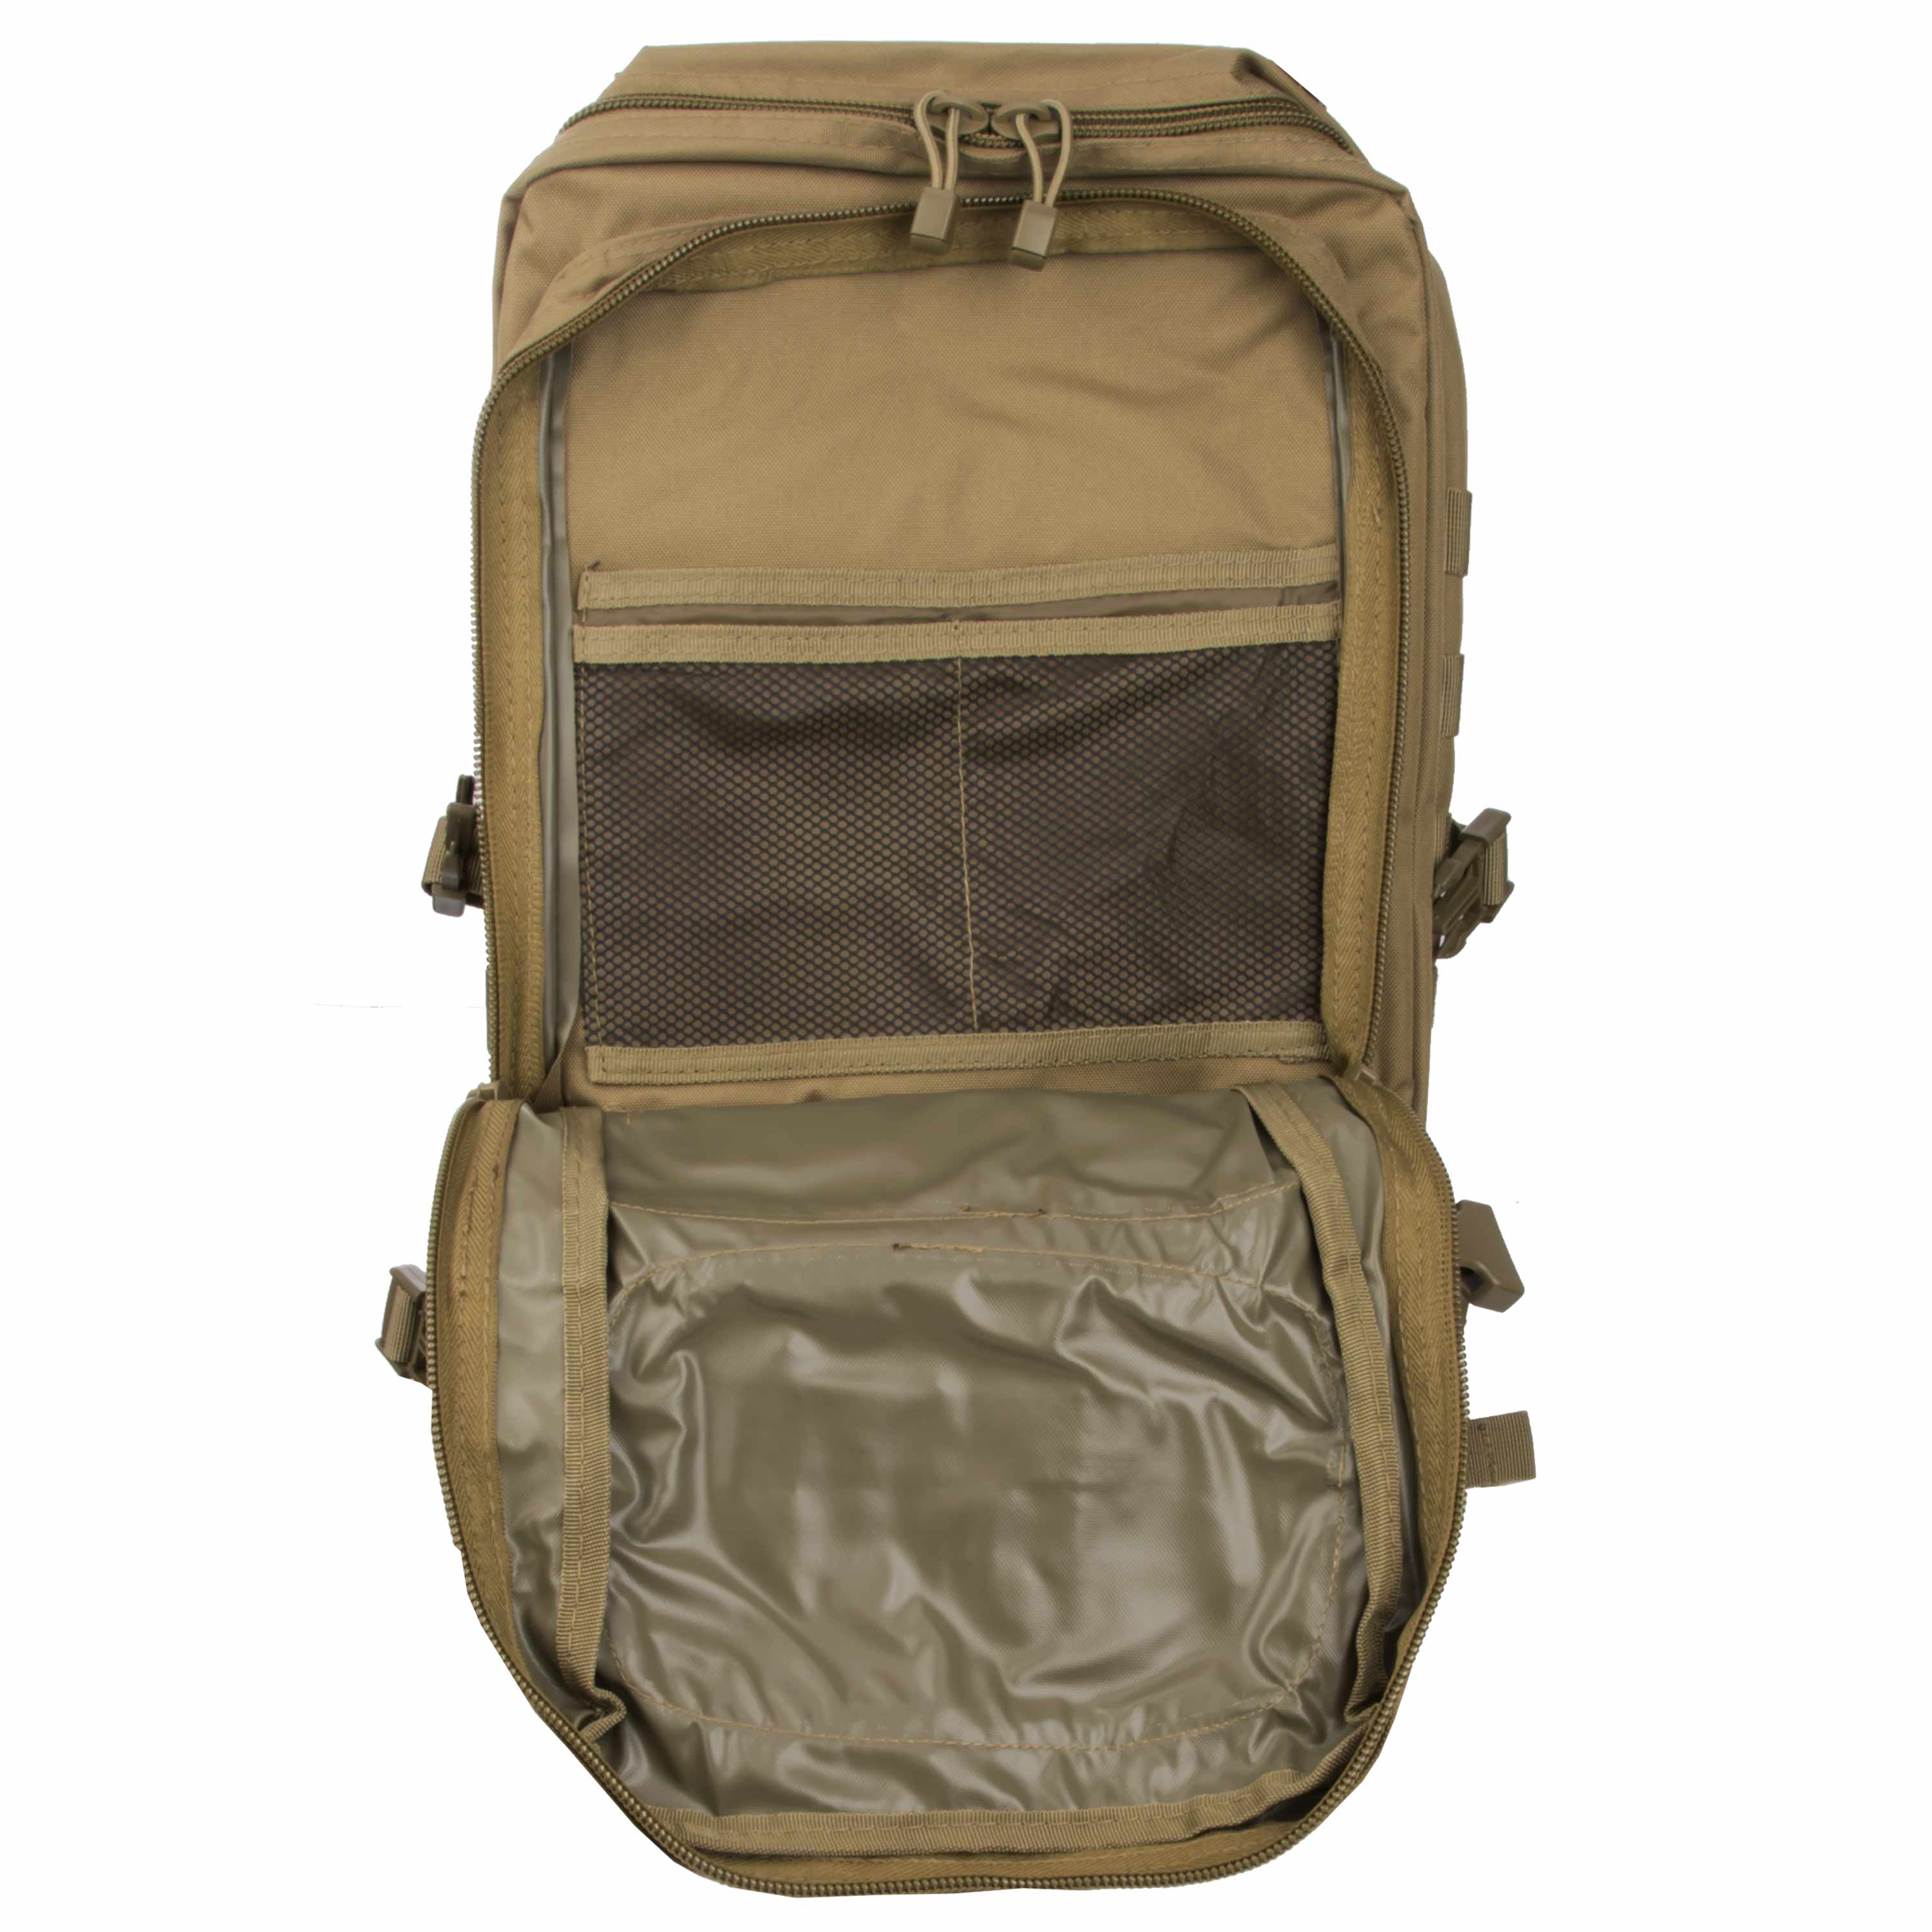 Brandit US Cooper Large Assault Pack II Camouflage BW Army Sac a dos randonnée